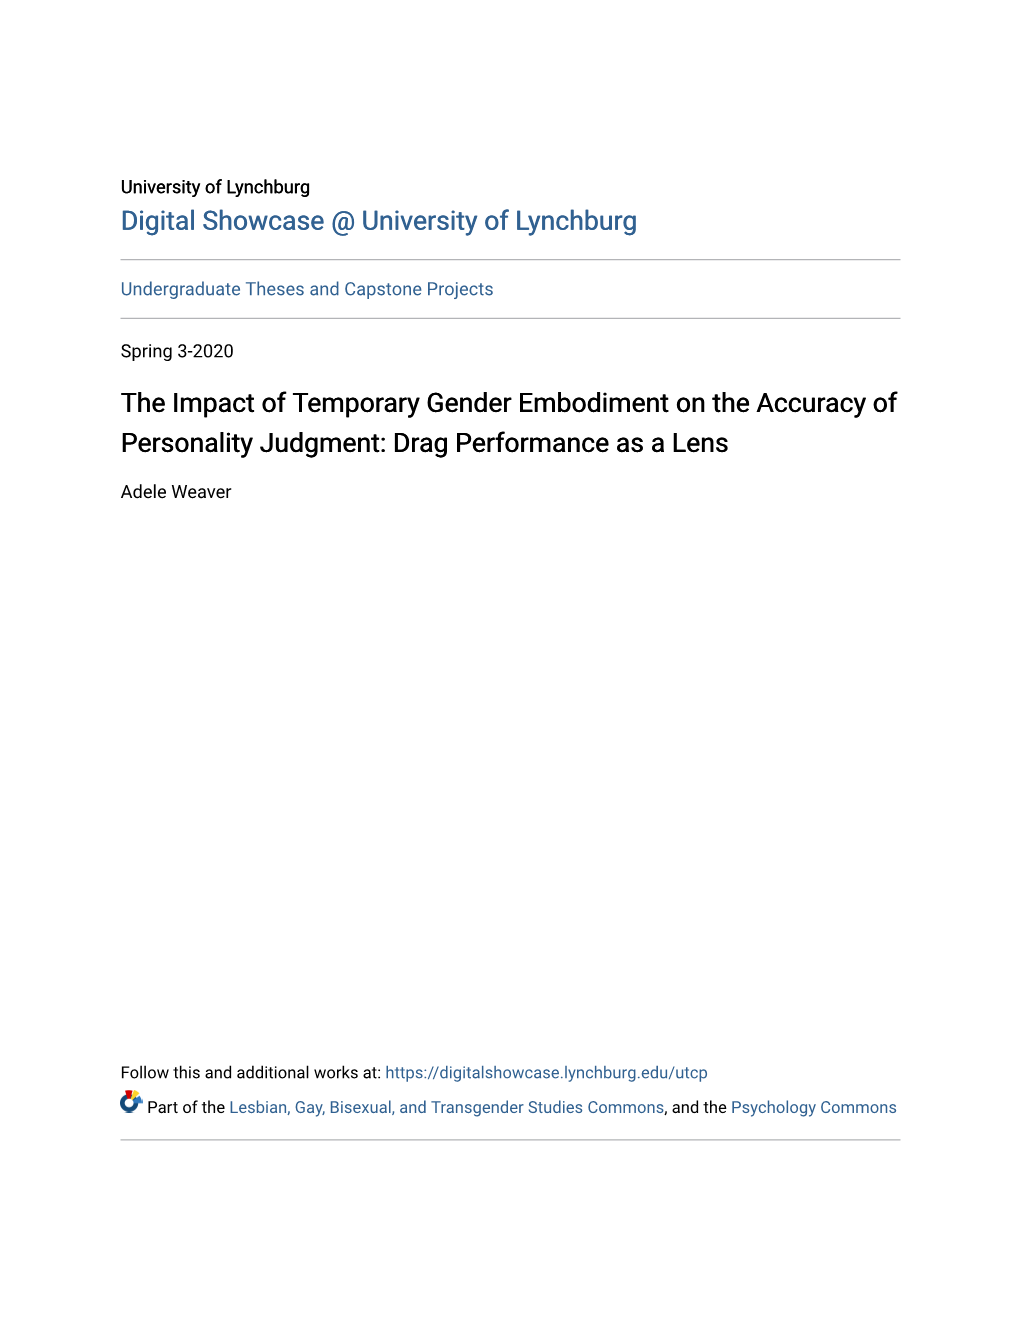 The Impact of Temporary Gender Embodiment on the Accuracy of Personality Judgment: Drag Performance As a Lens